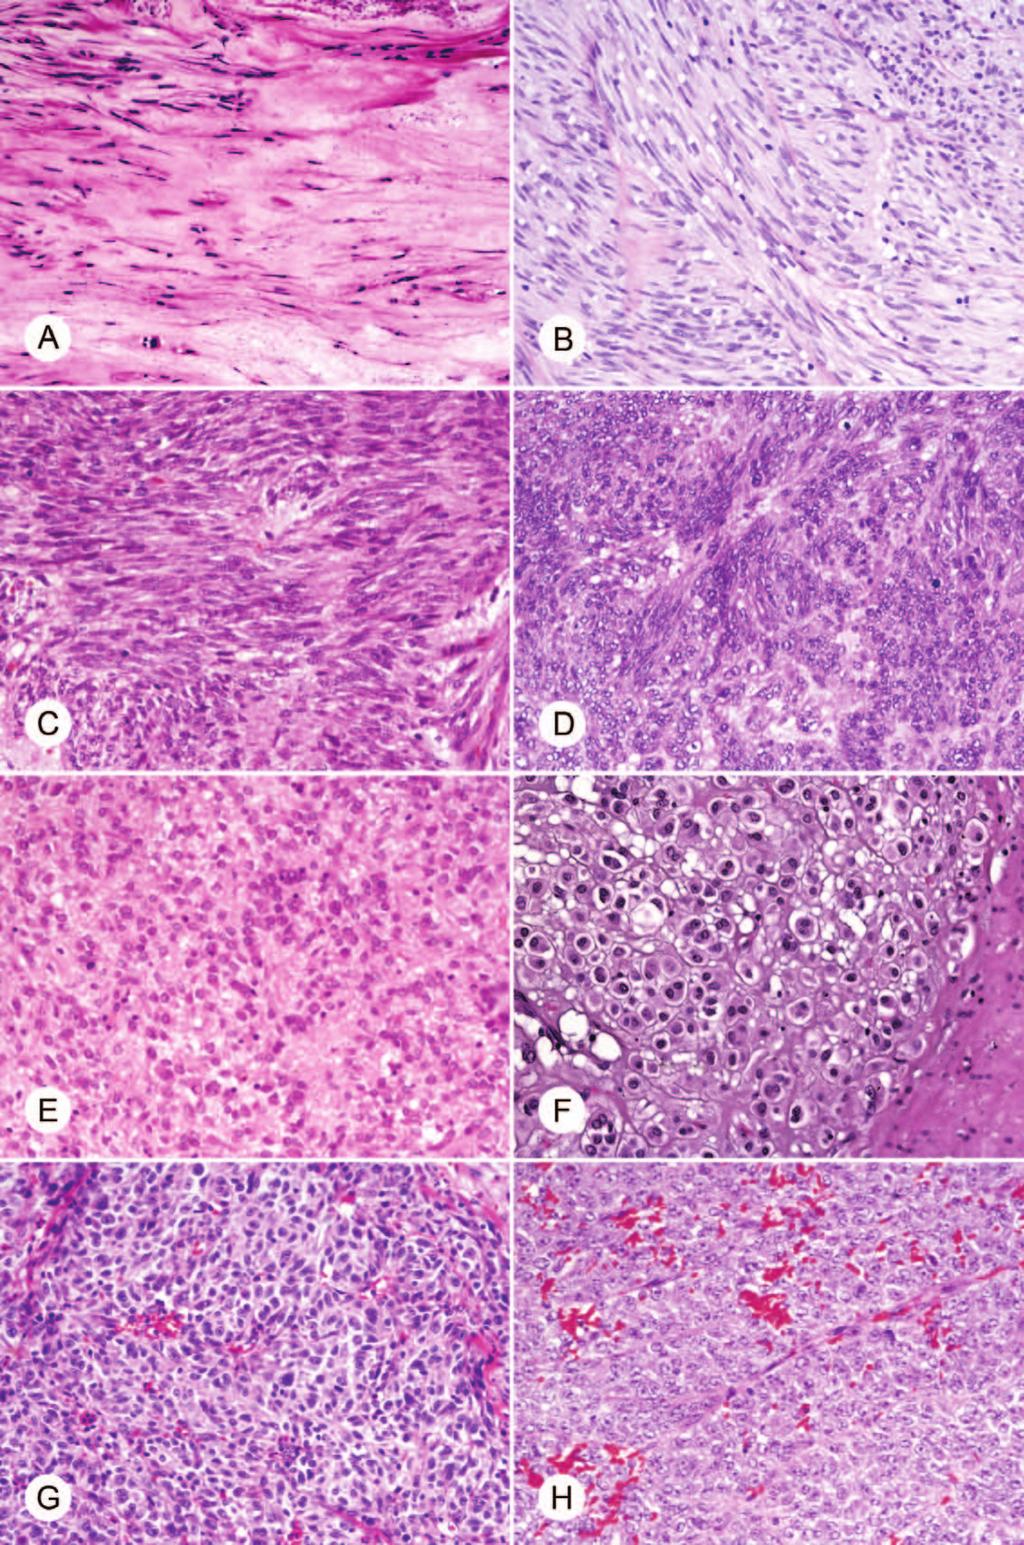 Figure 2. Histologic spectrum of gastric gastrointestinal stromal tumor (GIST). A, Sclerosing spindle cell GIST. B, Palisaded-vacuolated spindle cell GIST. C, Hypercellular spindle cell GIST.